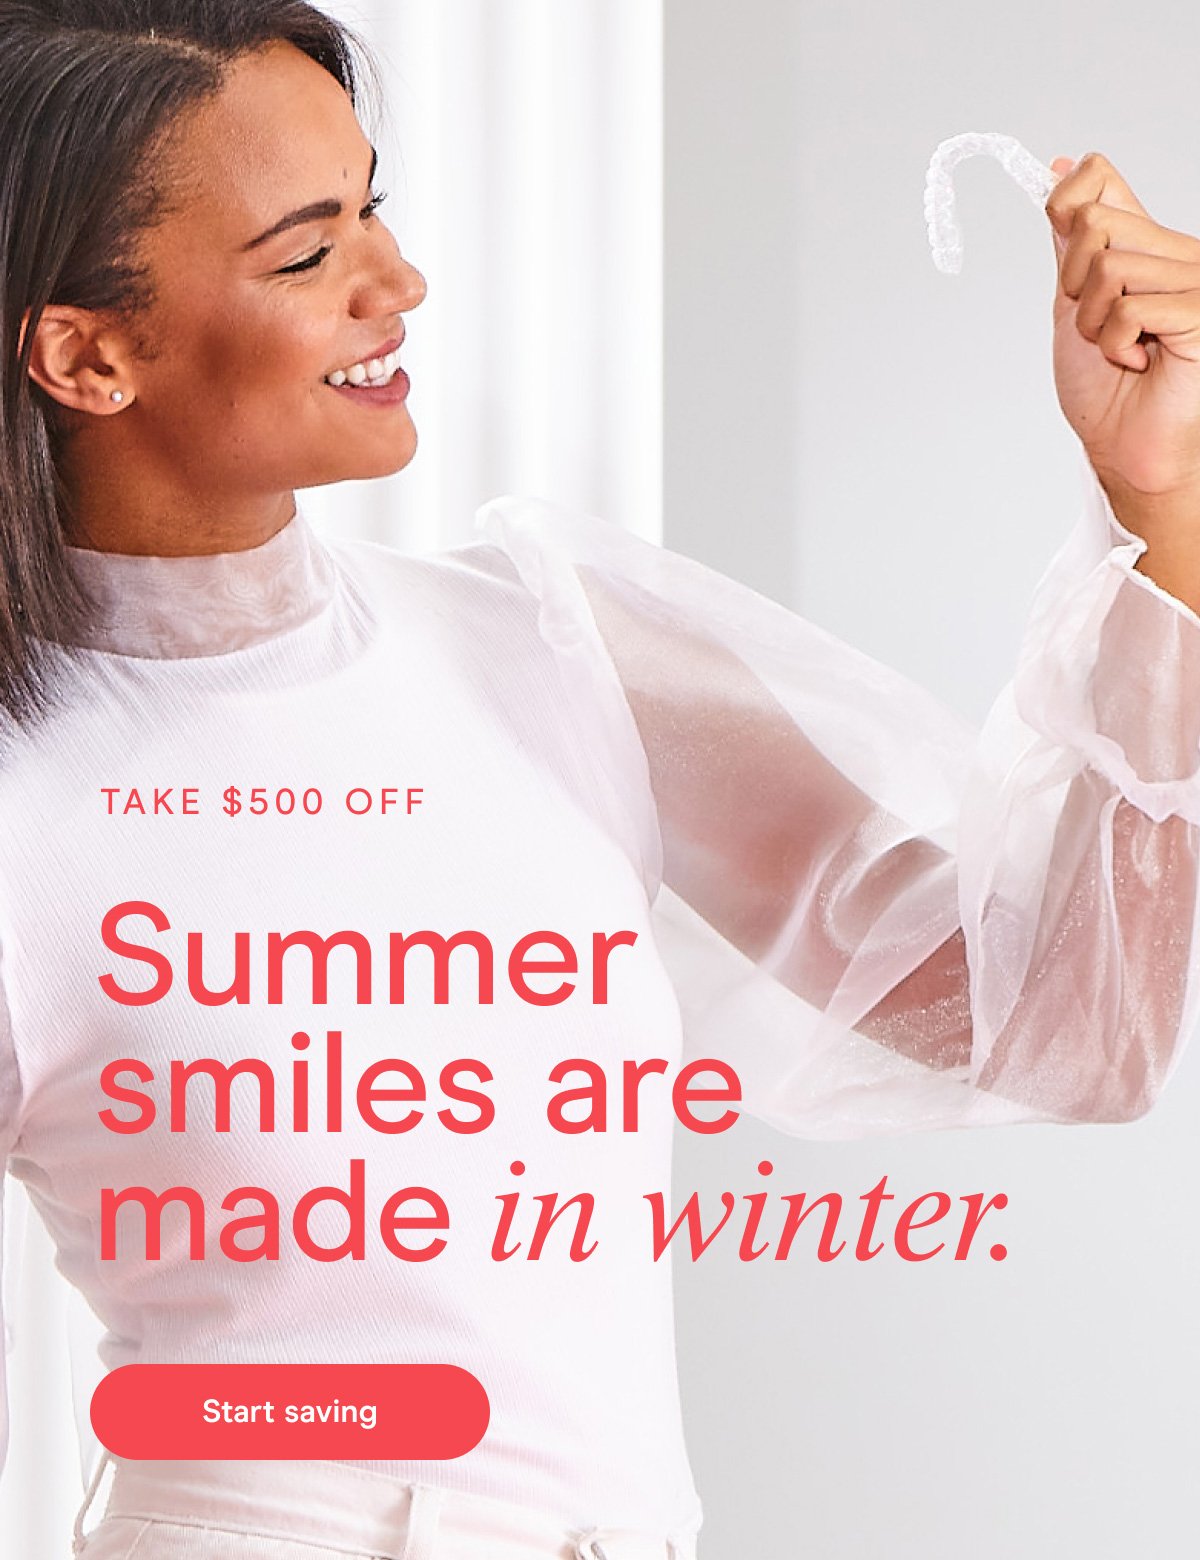 Summer smiles are made in winter: Start saving